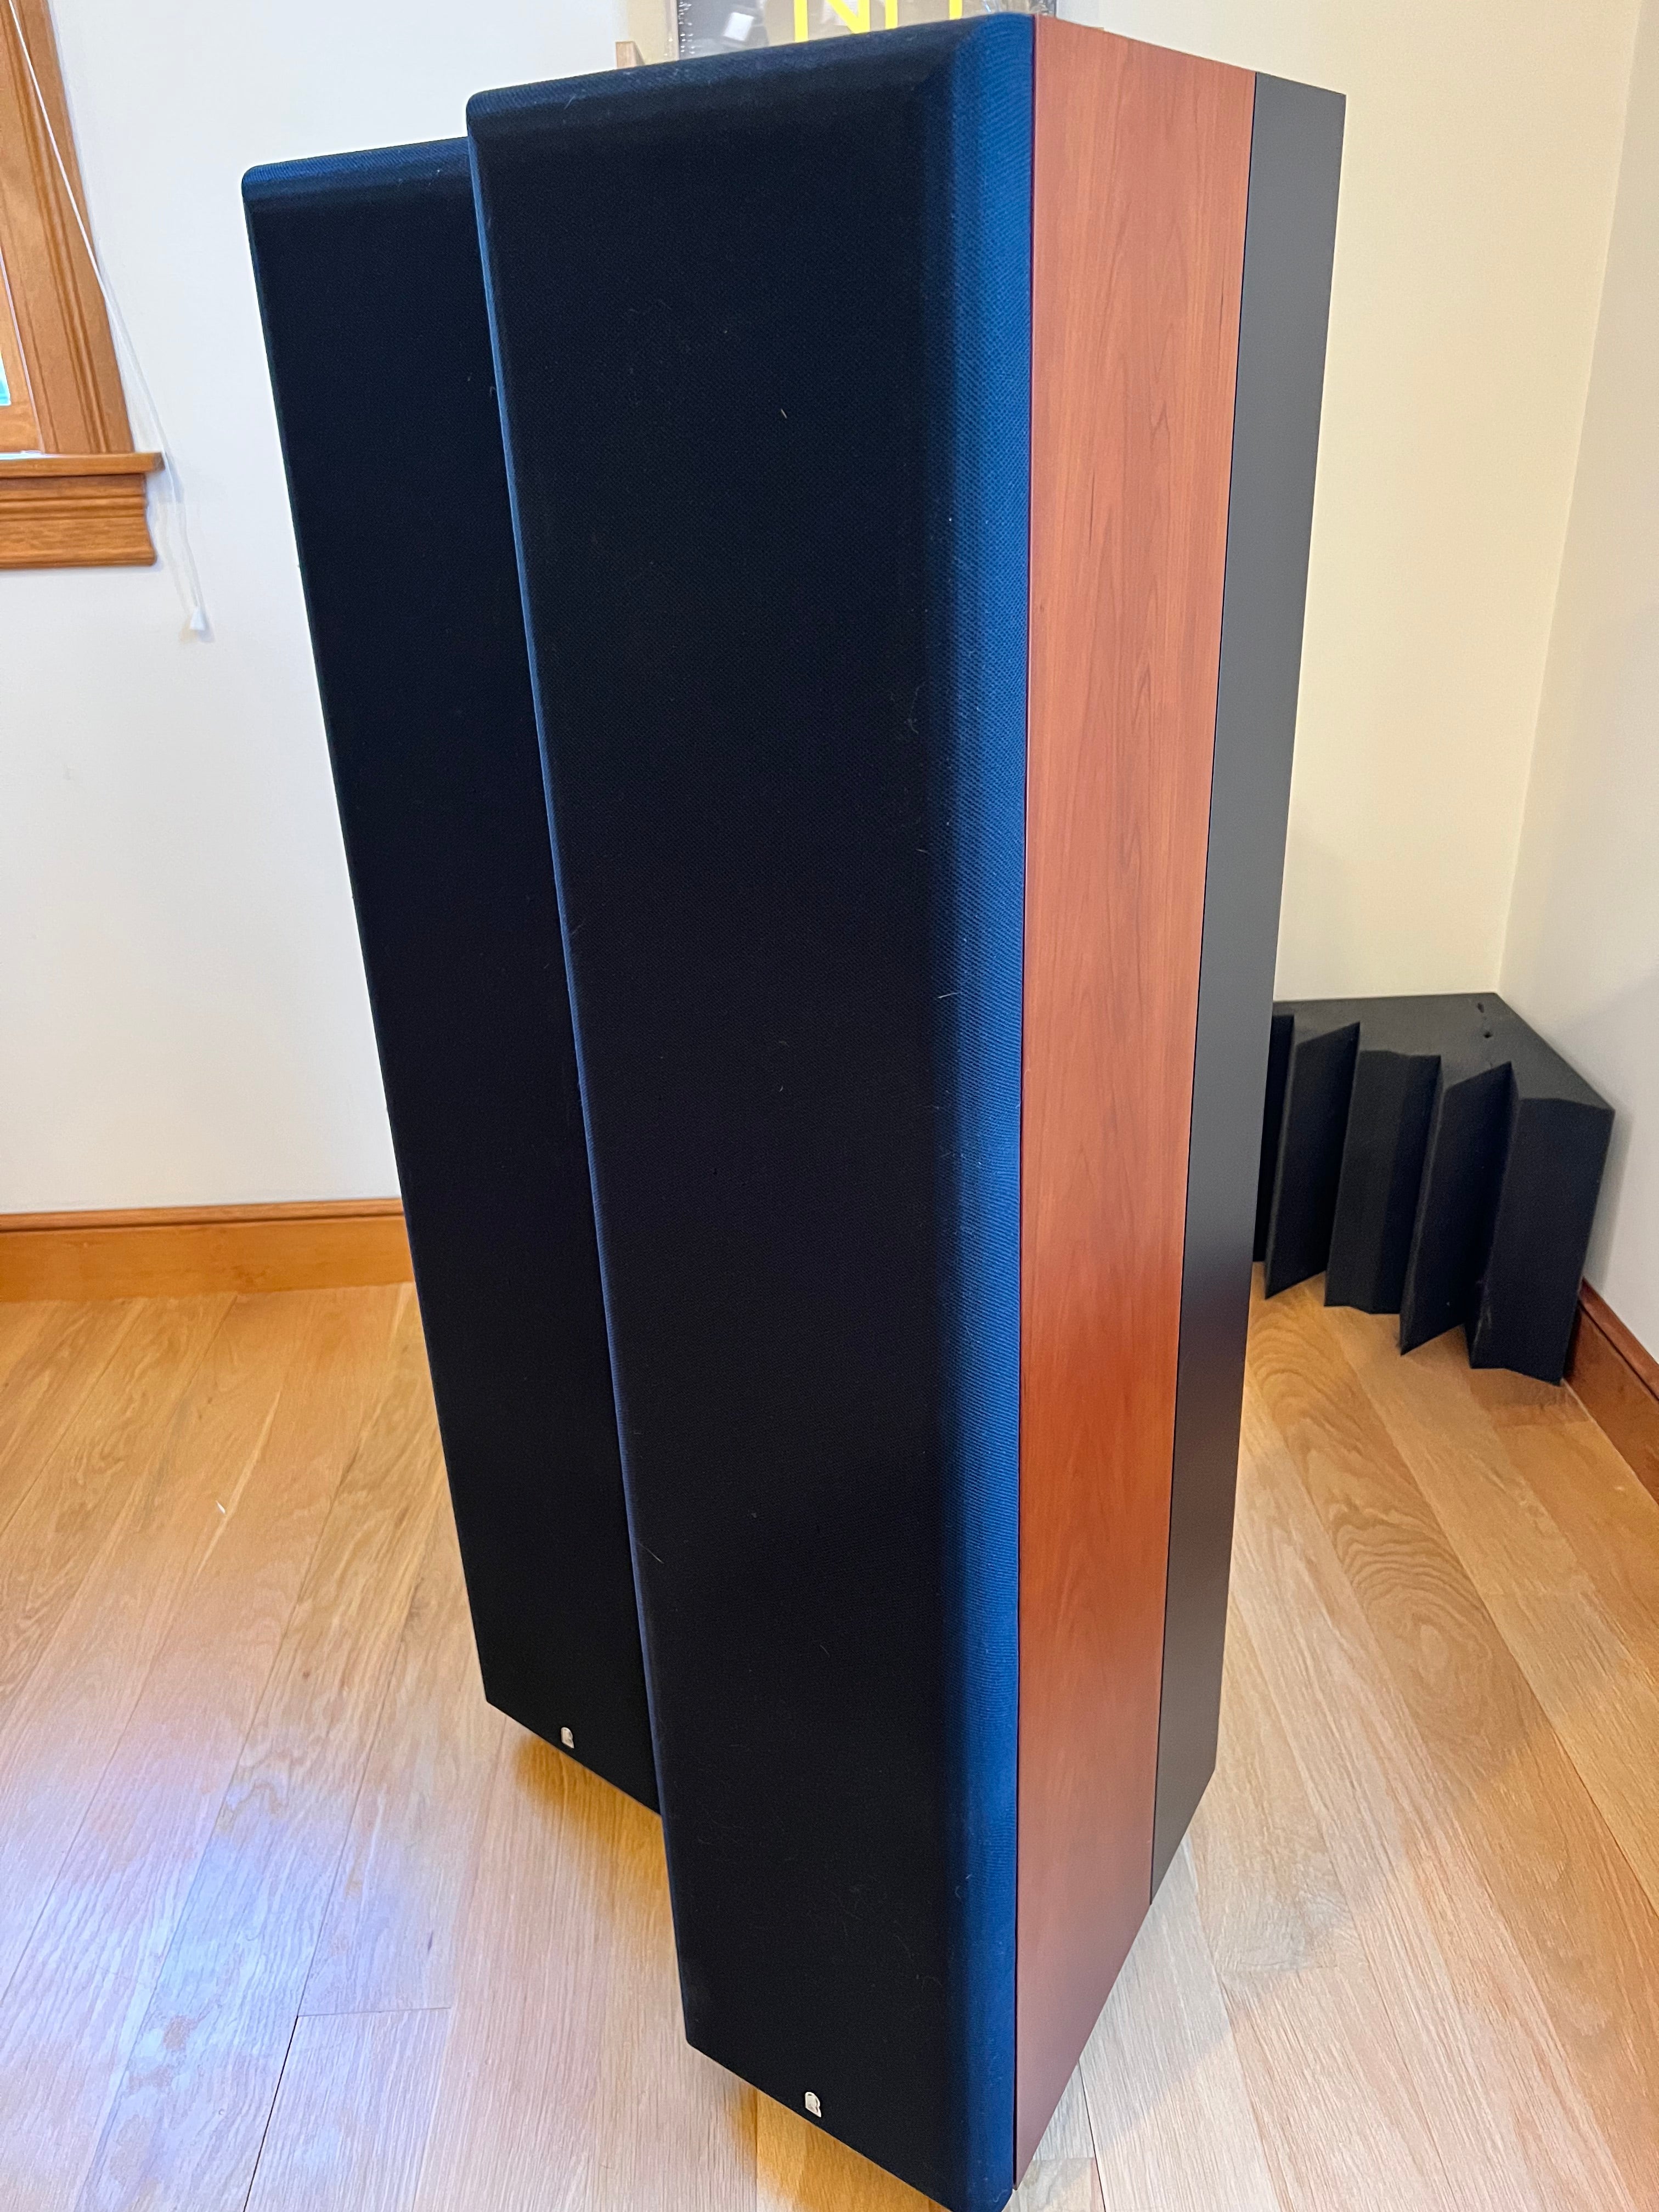 Revel Performa F32 Tower Speakers, Cherry Wood Finish - SOLD